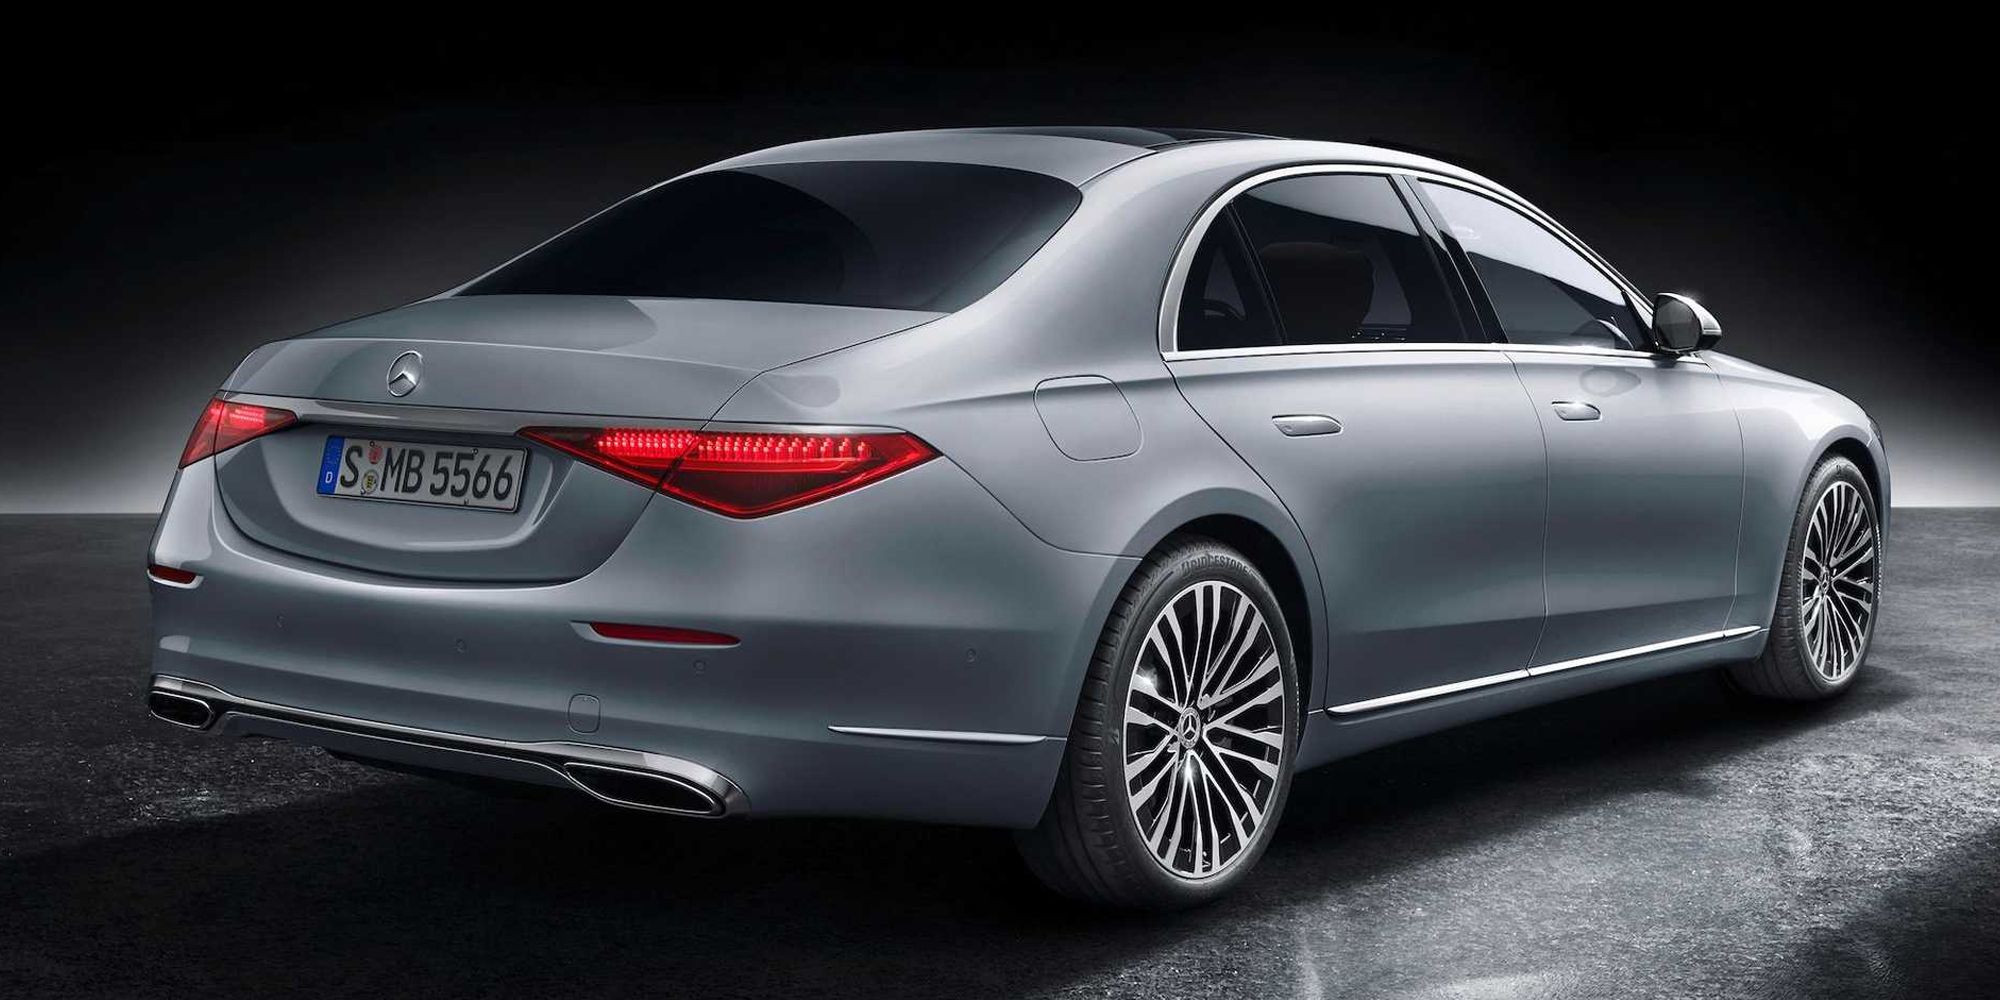 10 Reasons Why We're Excited About The New Mercedes-Benz S-Class